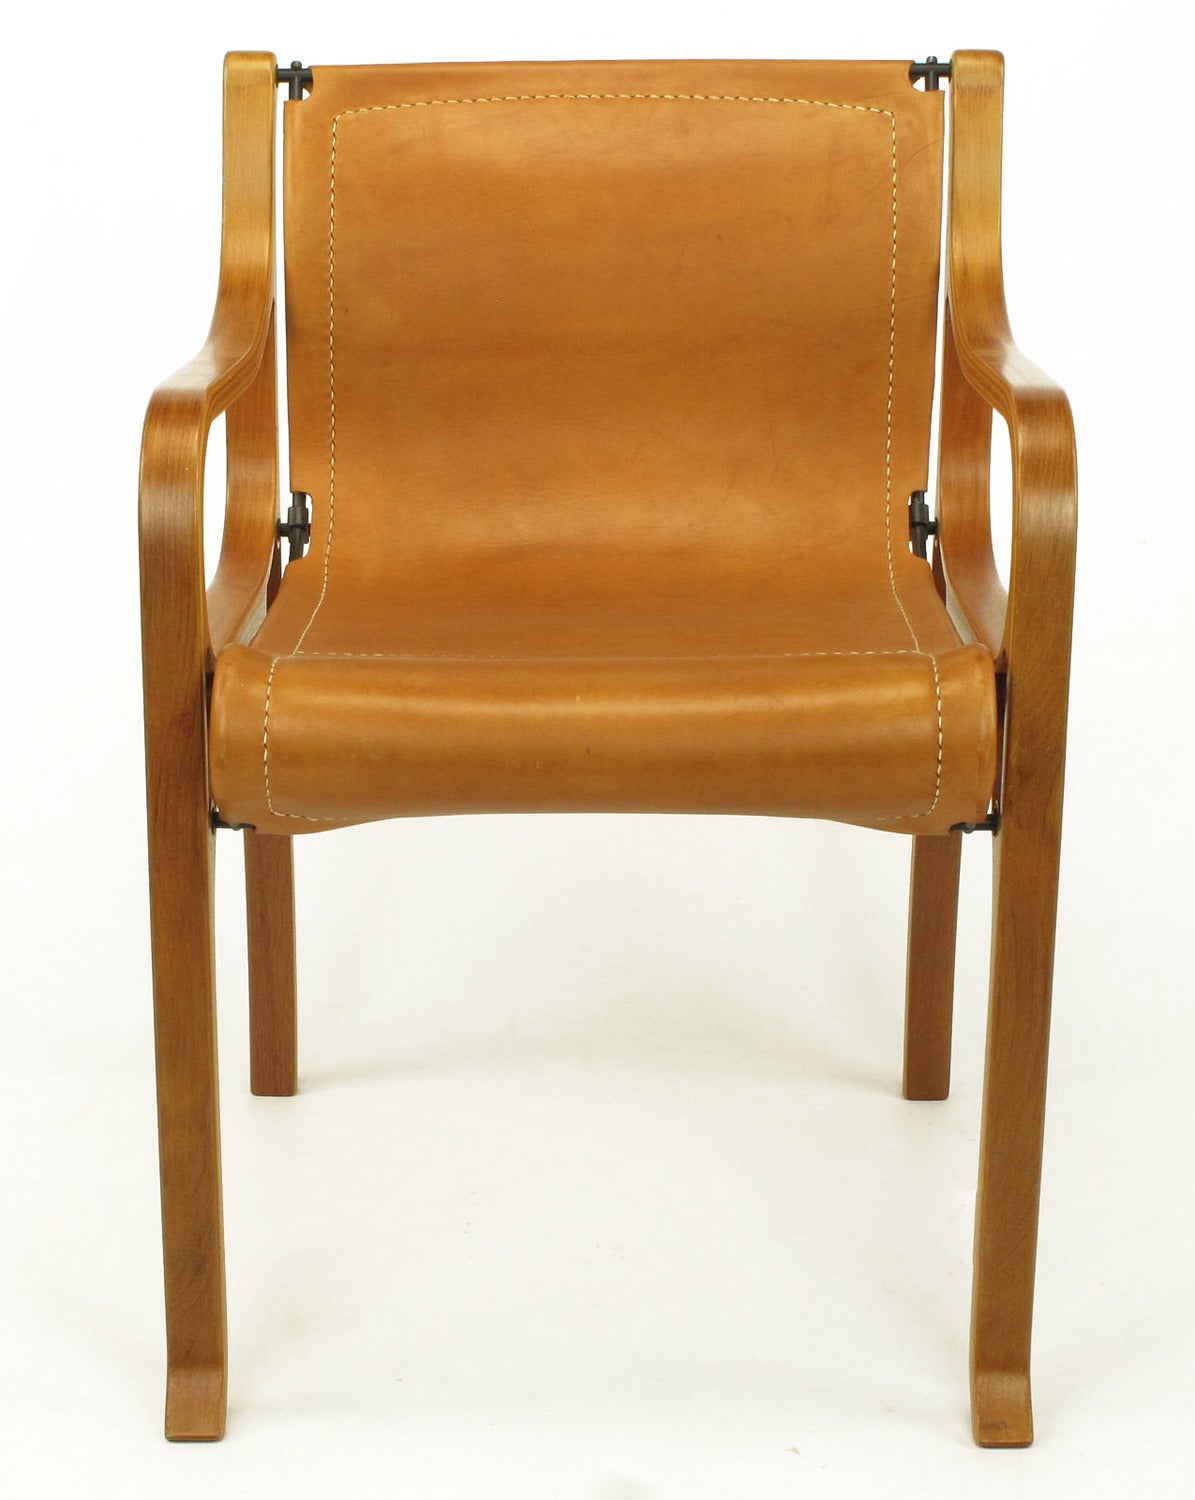 Remarkably realistic cast and hand tinted resin resembling steam bent plywood one piece arms and legs connected by black powder coated iron frame supports. High quality umber leather with white stitching.